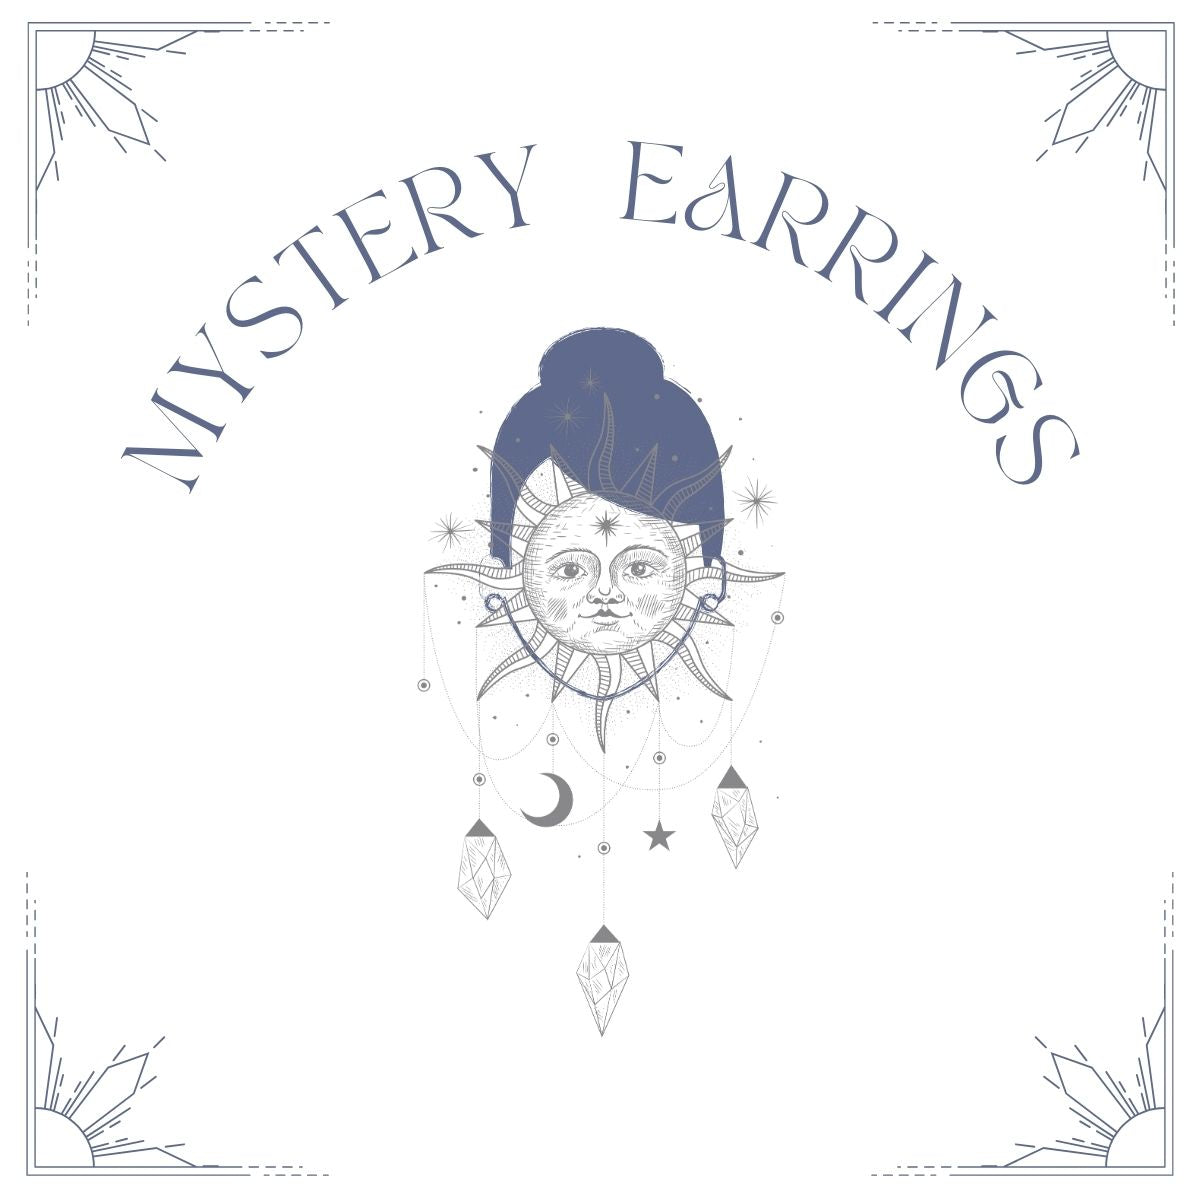 Mystery earrings: Encapsulated in mystery and intrigue, each box holds a secret gemstone earrings, waiting to unveil its enchanting properties and energies.